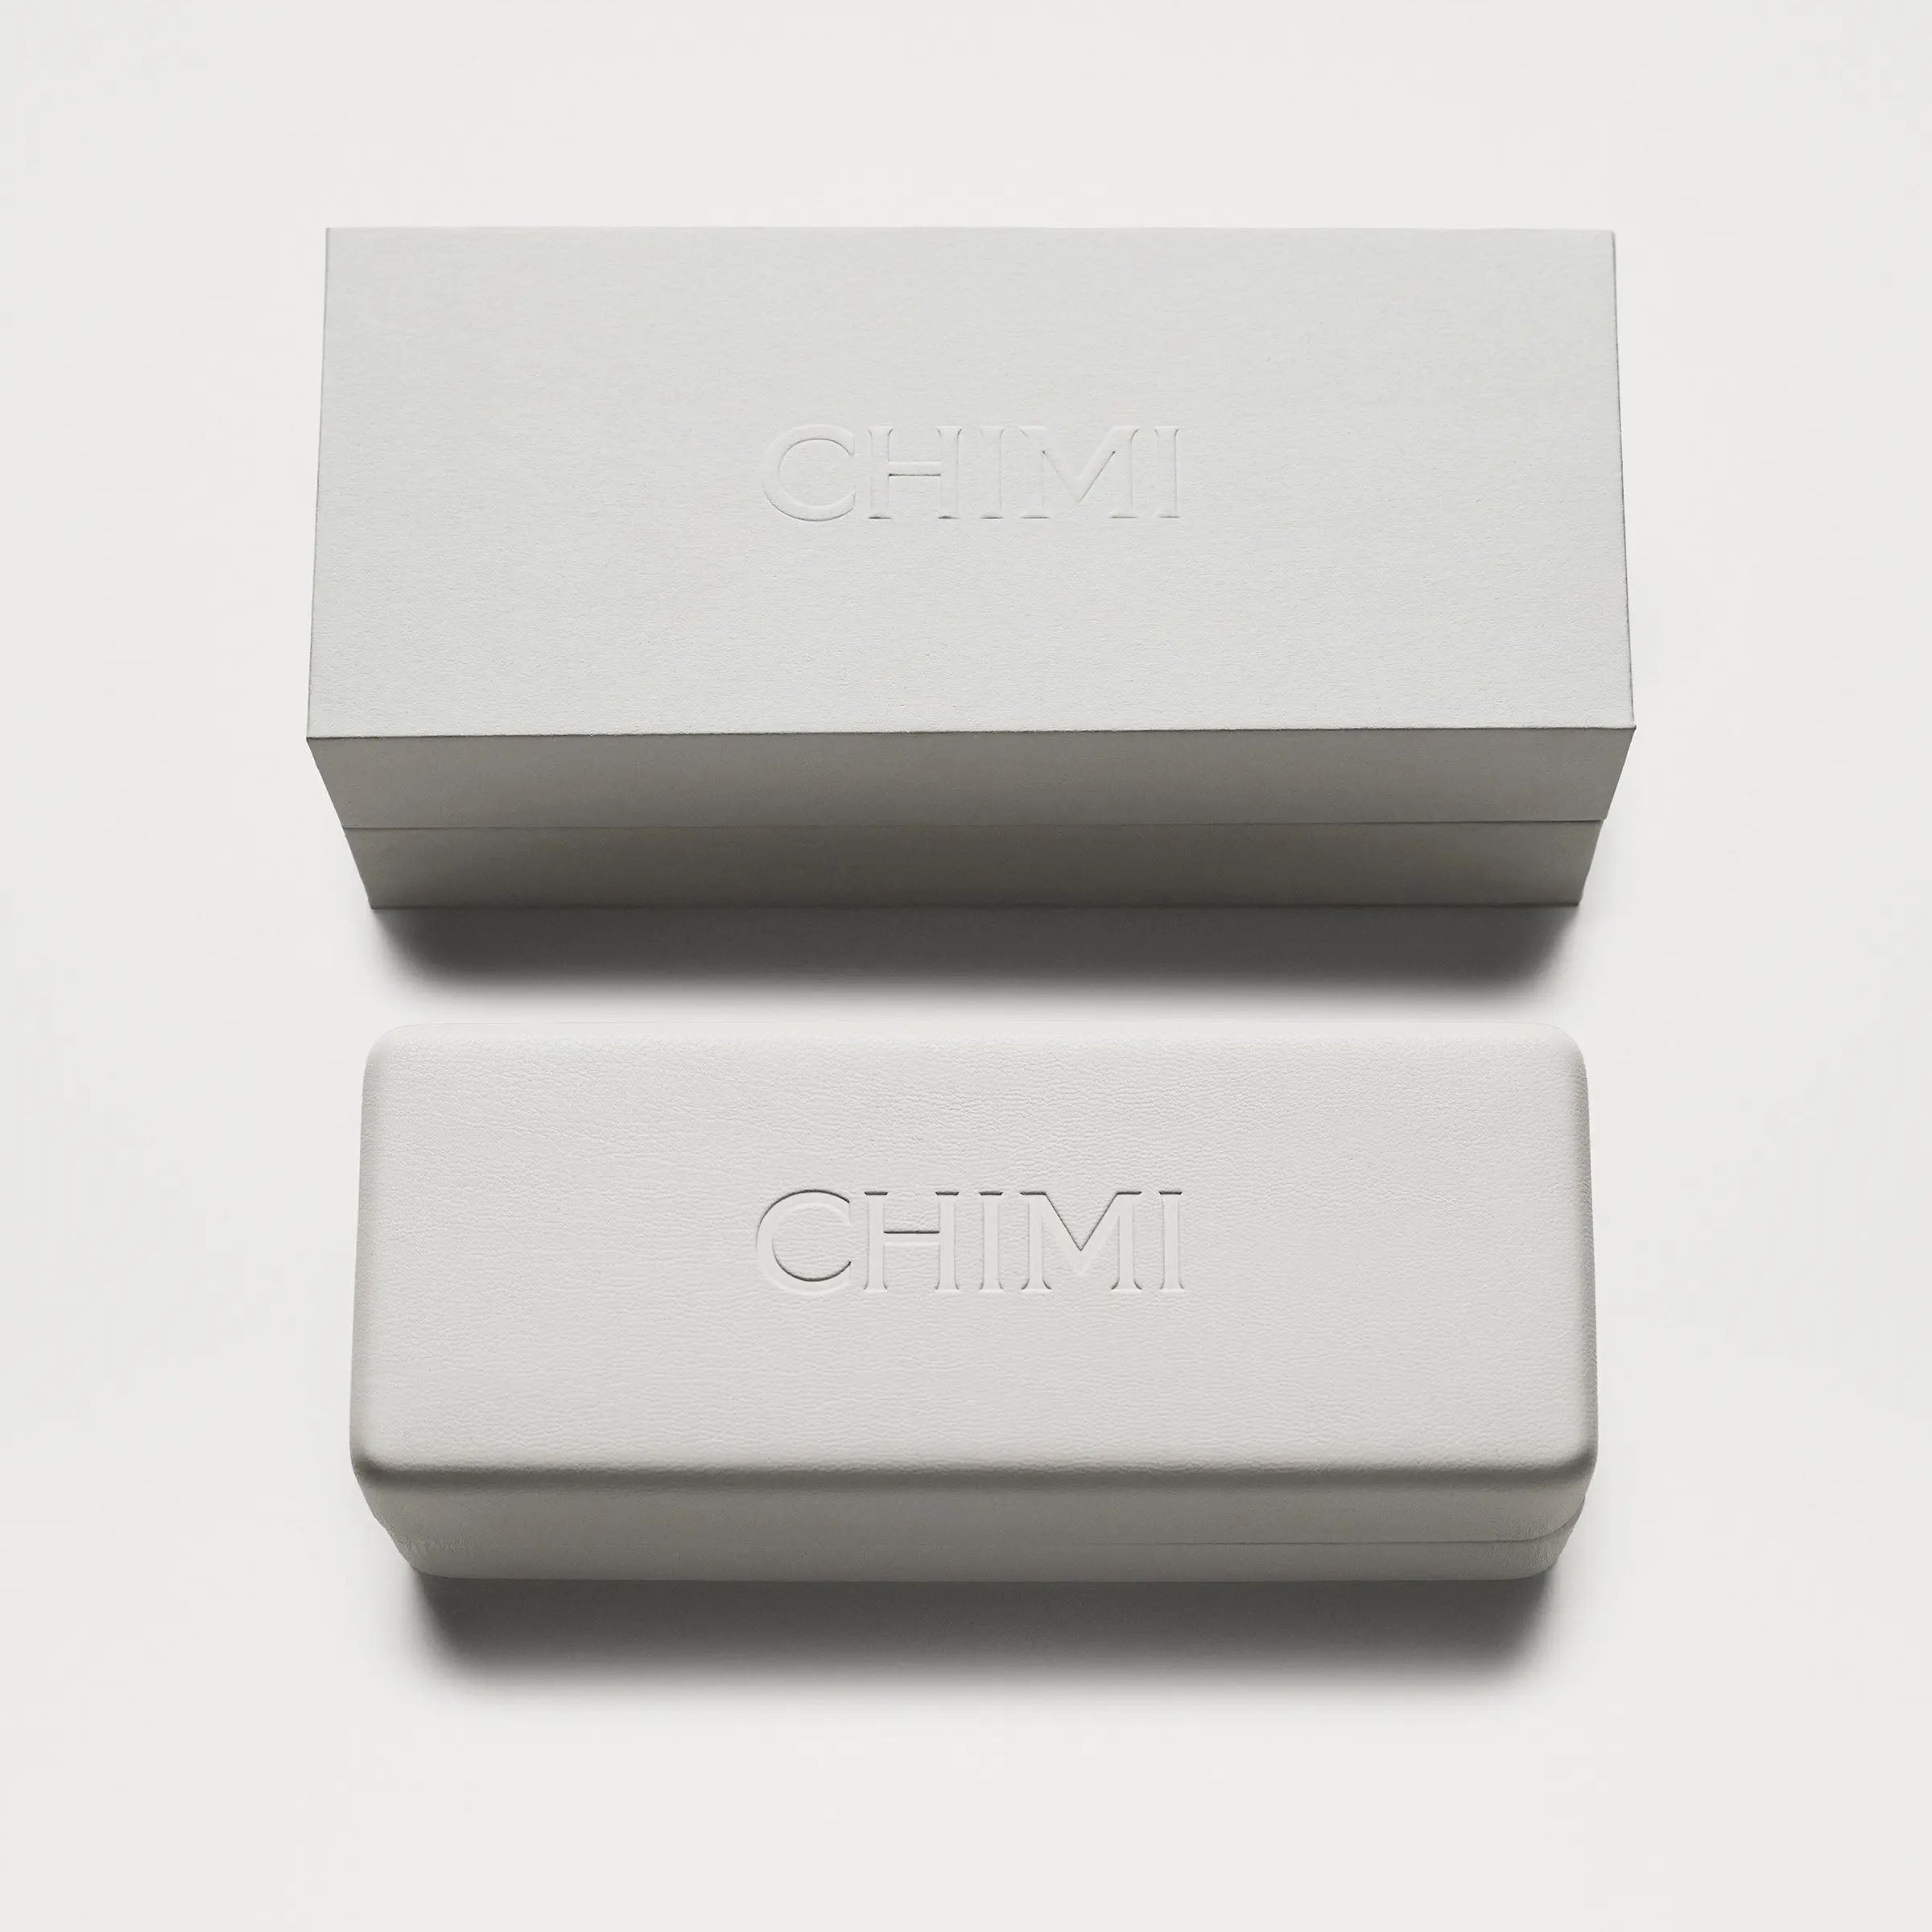 Two rectangular Chimi sunglasses brand boxes in a minimalist style stacked on a white background.